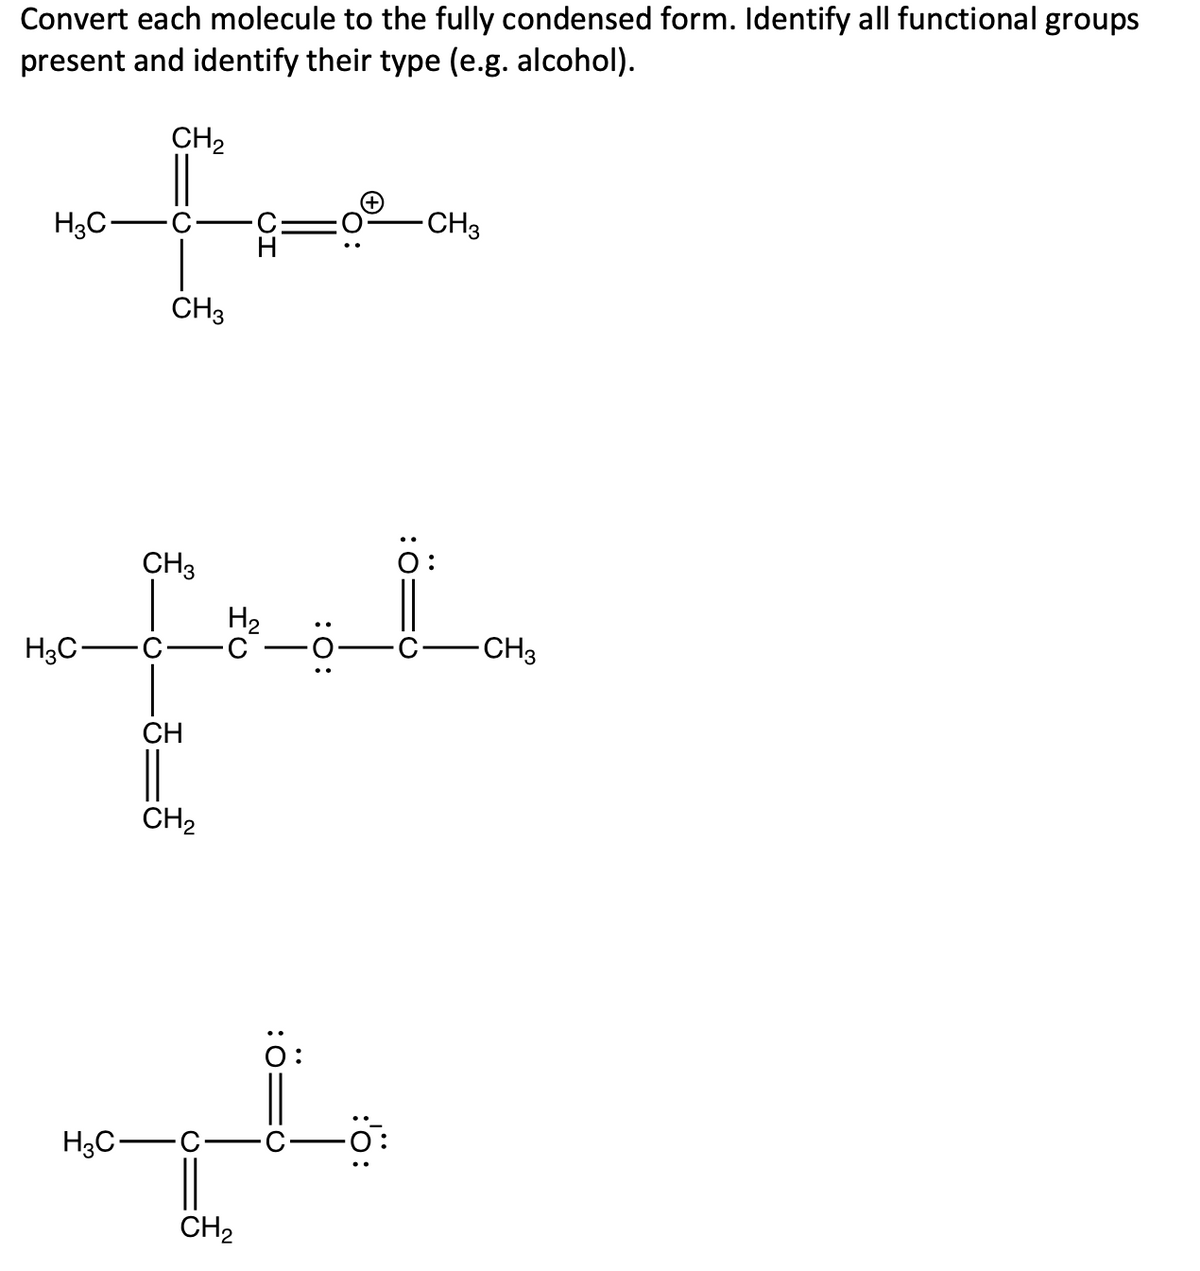 Convert each molecule to the fully condensed form. Identify all functional groups
present and identify their type (e.g. alcohol).
CH2
H3C-
CH3
CH3
CH3
O:
H2
H3C-
-CH3
CH
CH2
0:
H3C-
CH2
:0
:ö:
:0:
